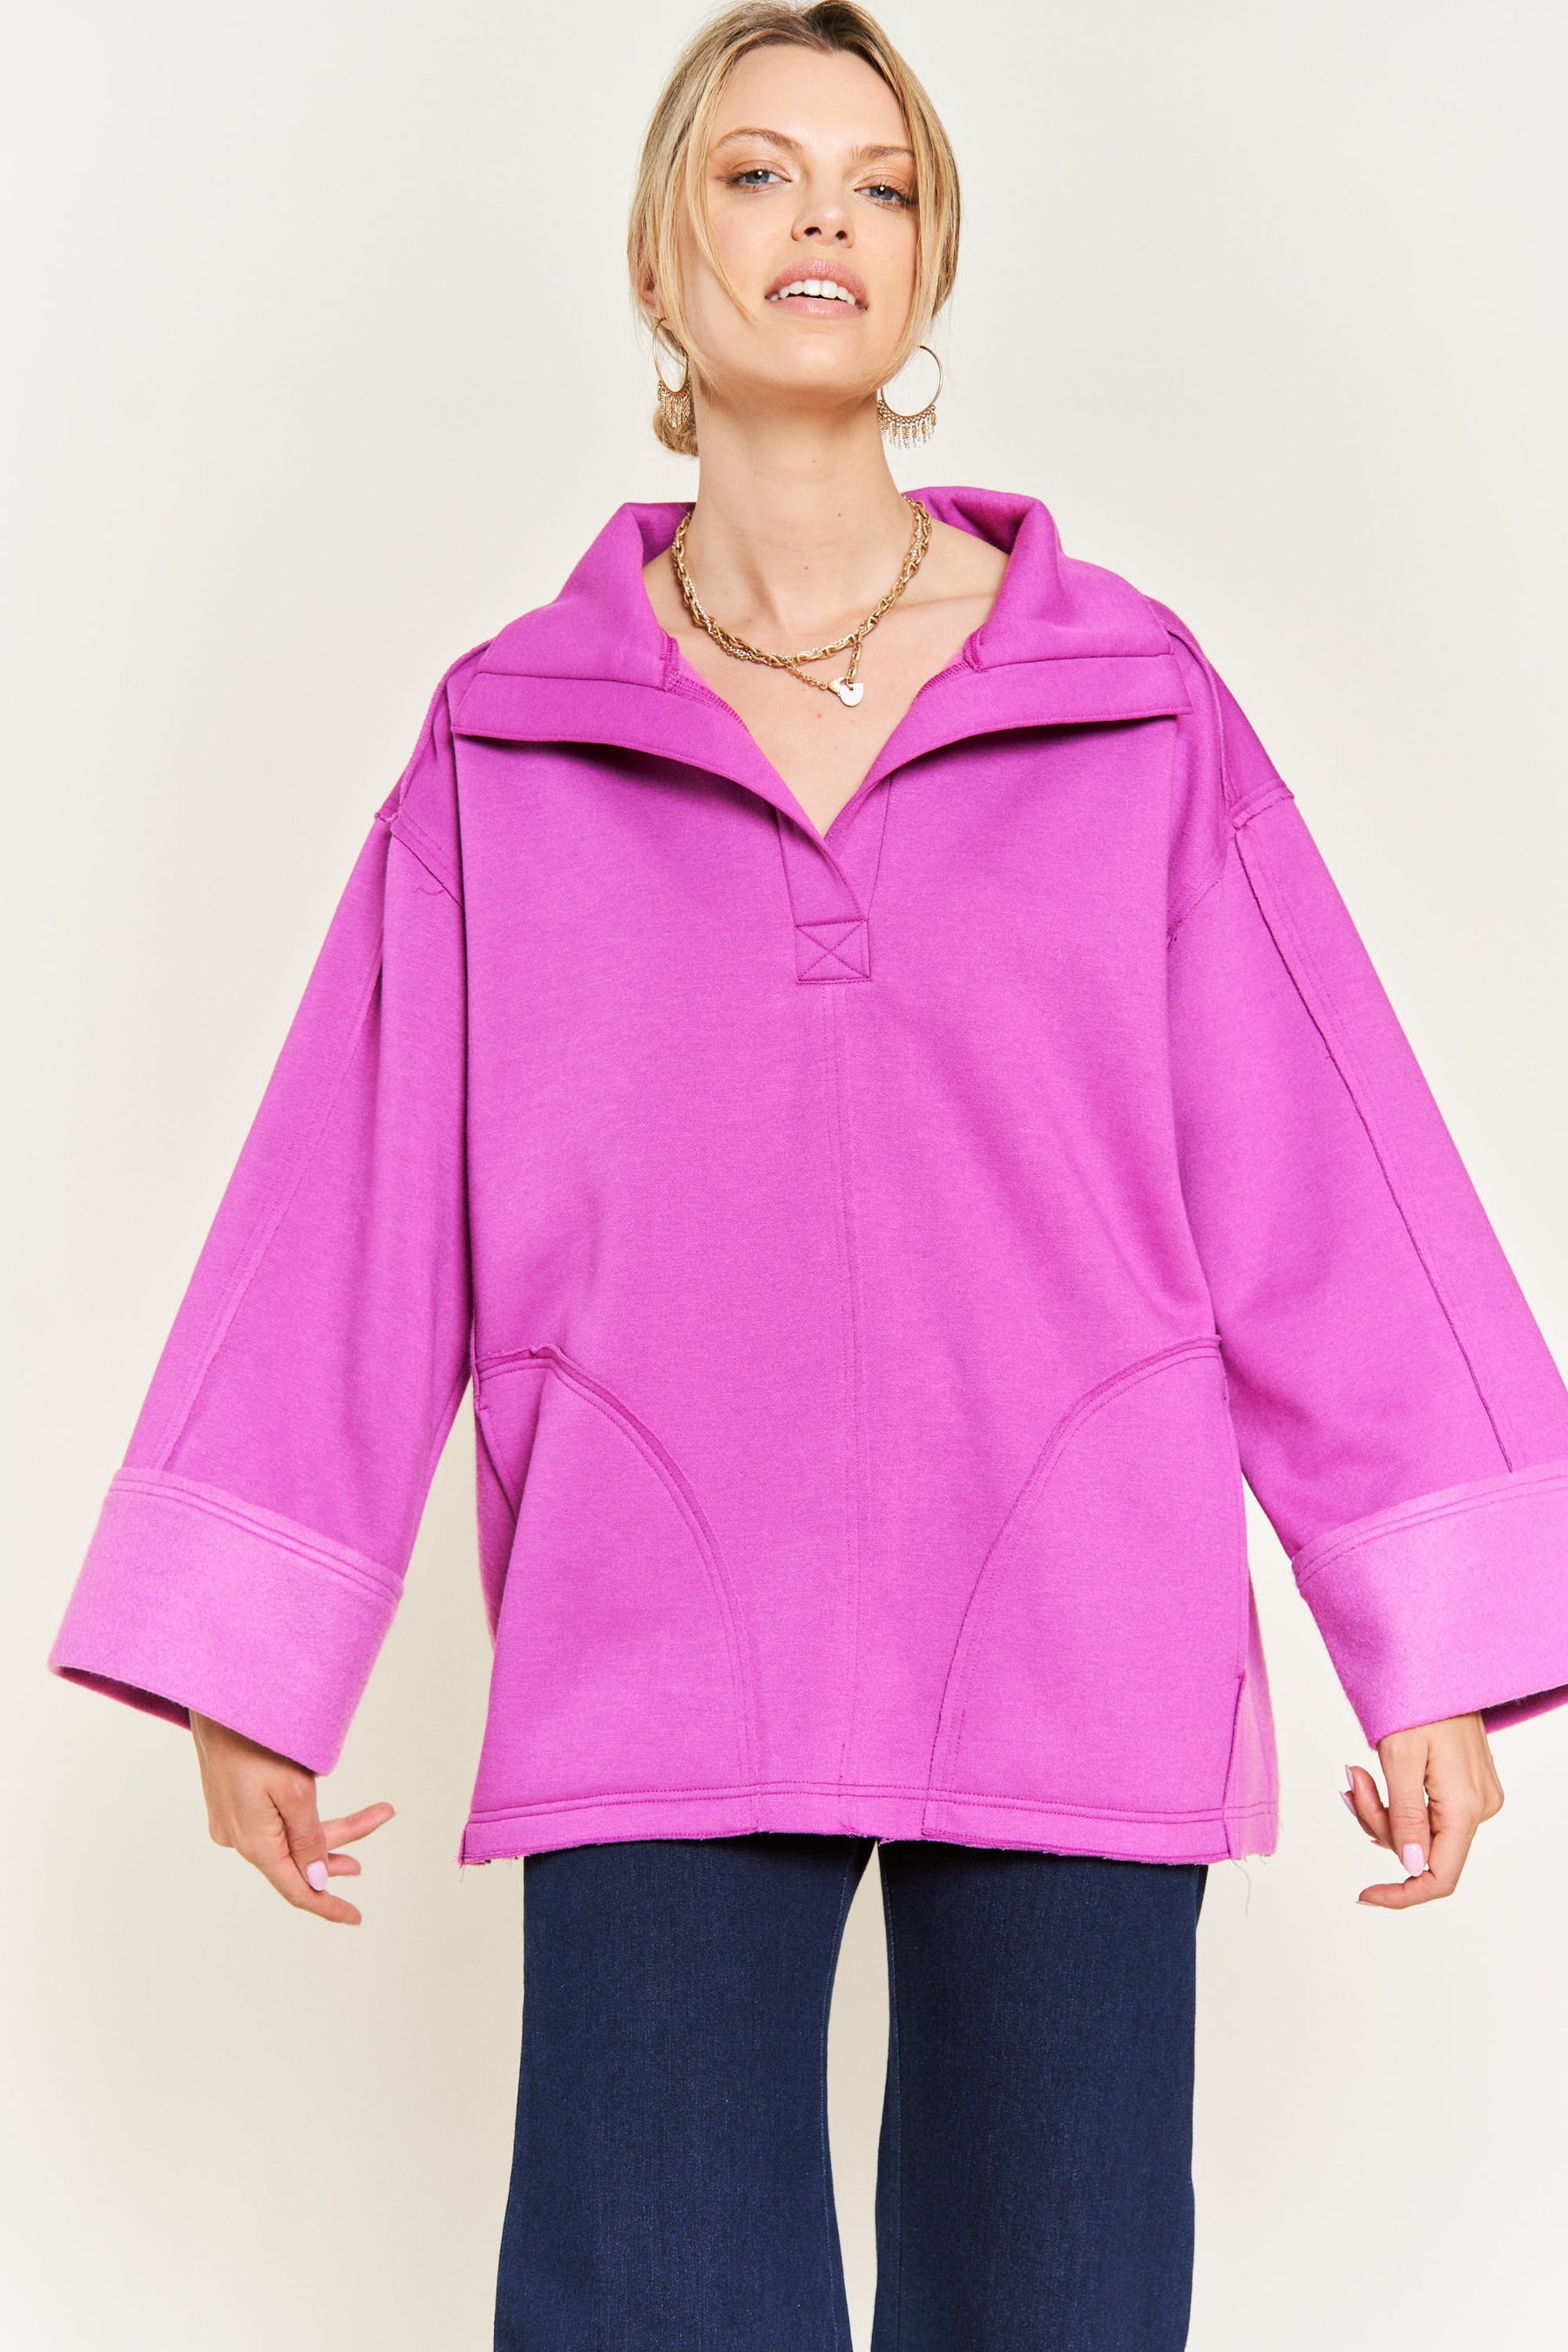 Together At Last Collared Pullover - Magenta